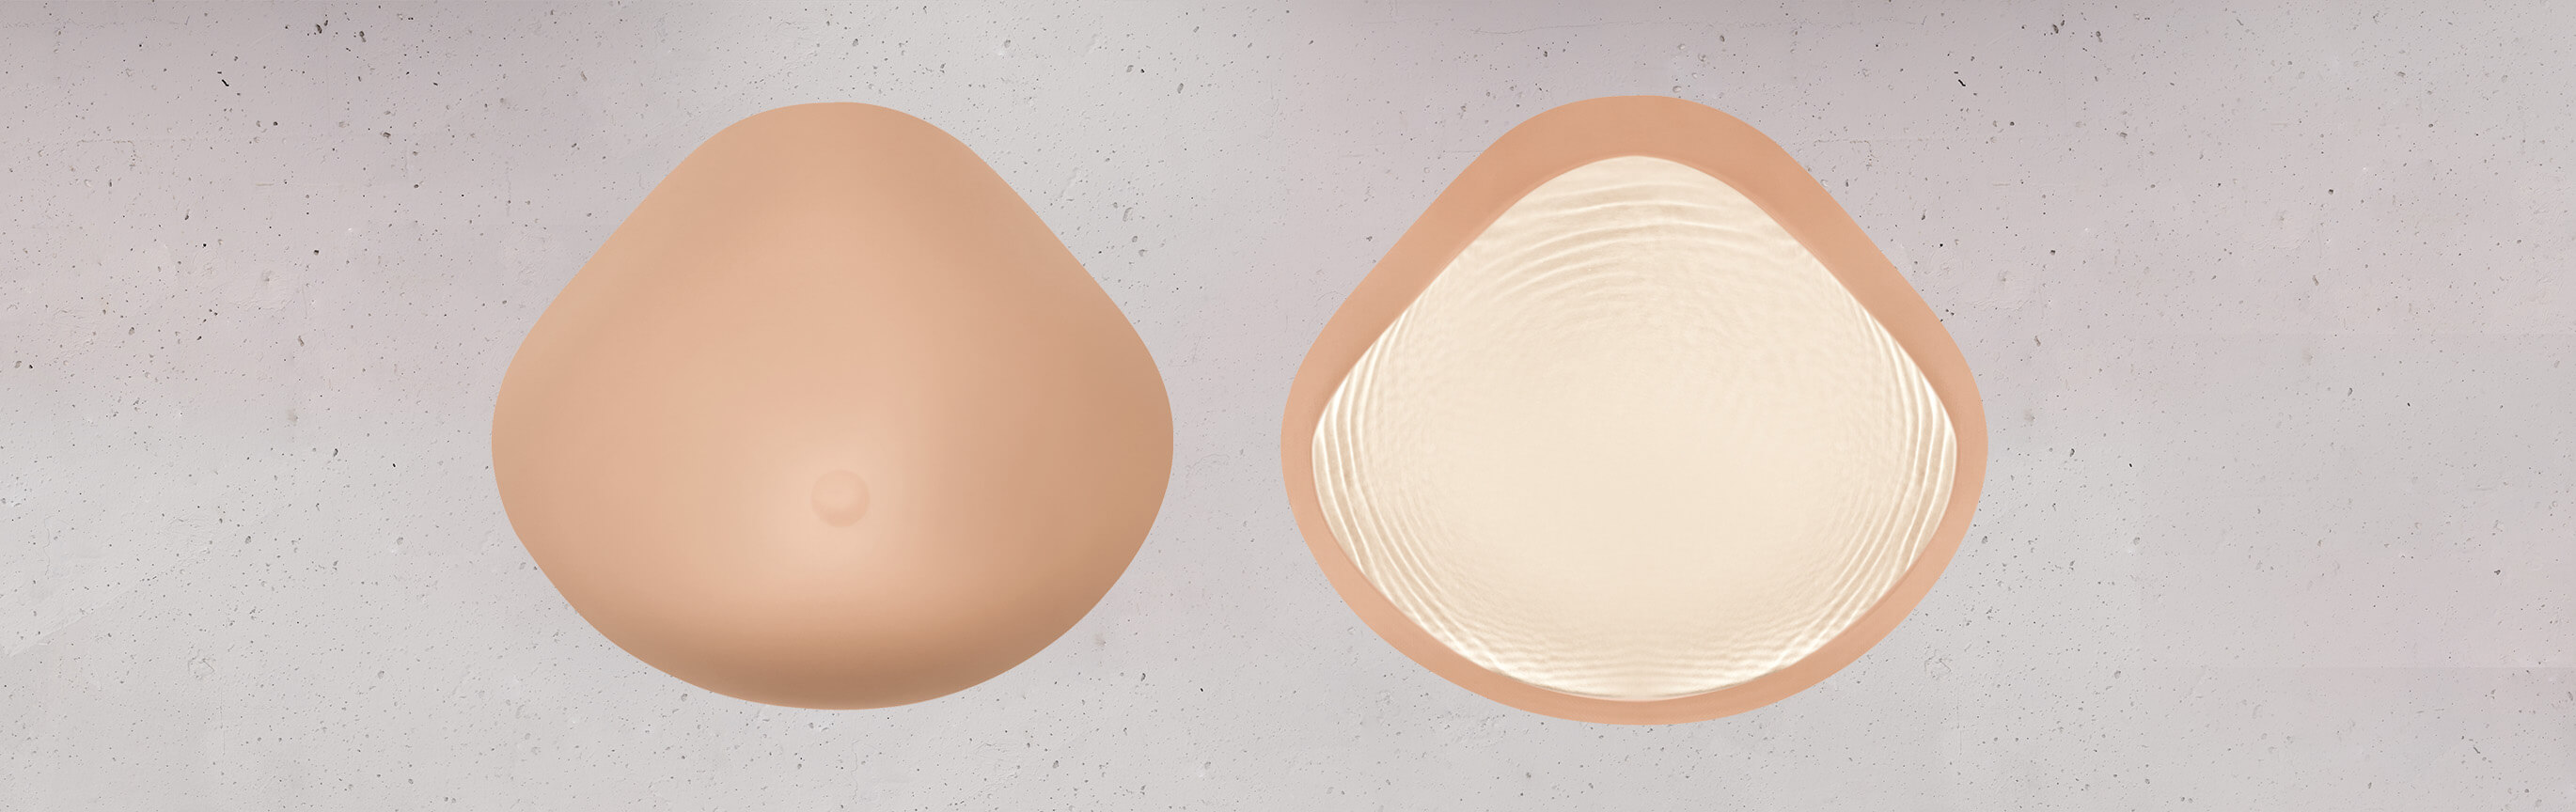 Natura Cosmetic Breast Form